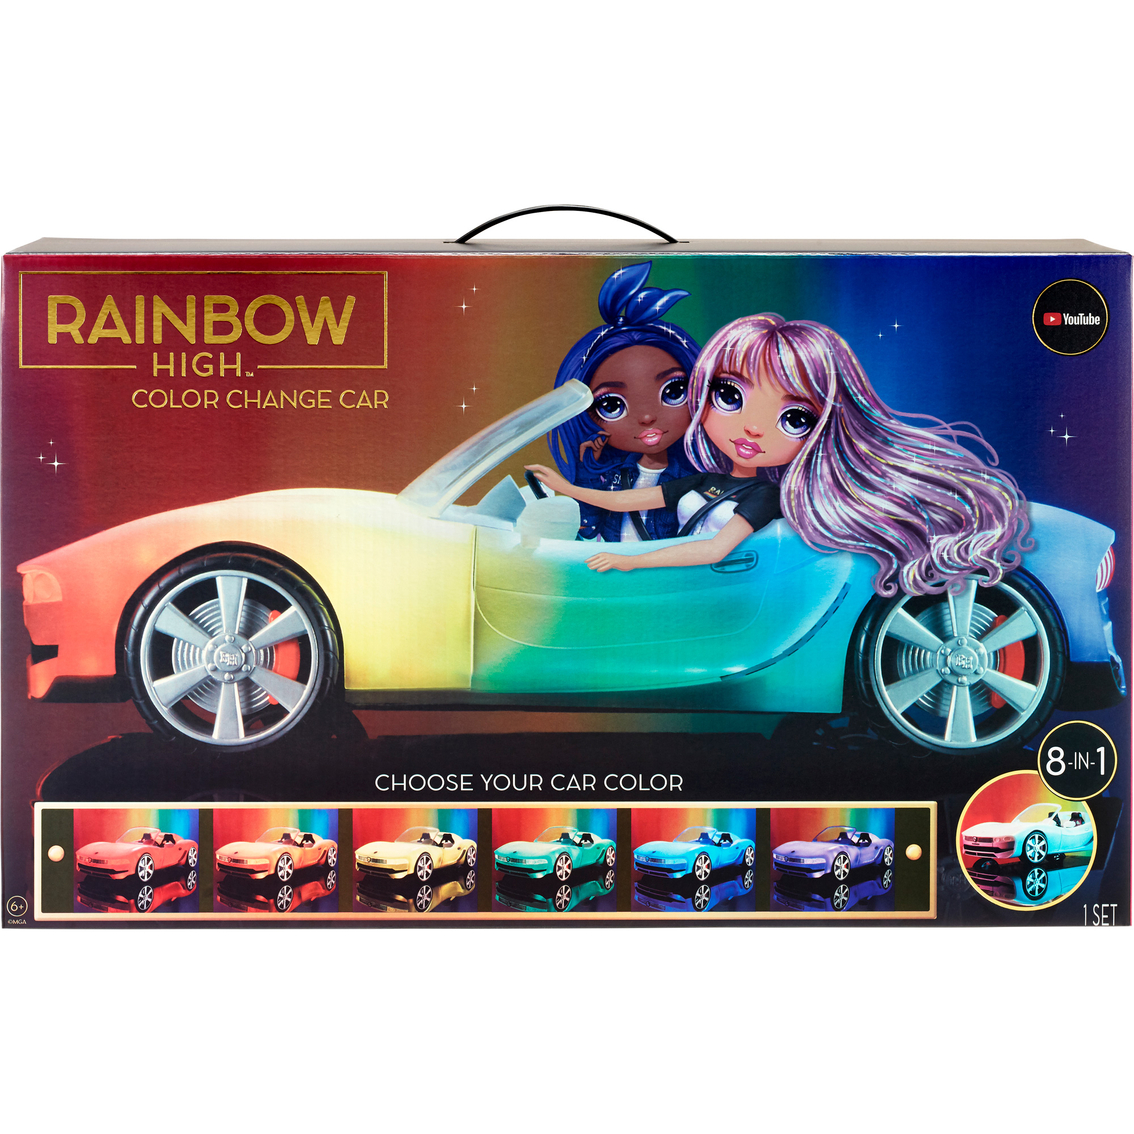 LOL Surprise Rainbow High Convertible Color Change Car - Image 1 of 10